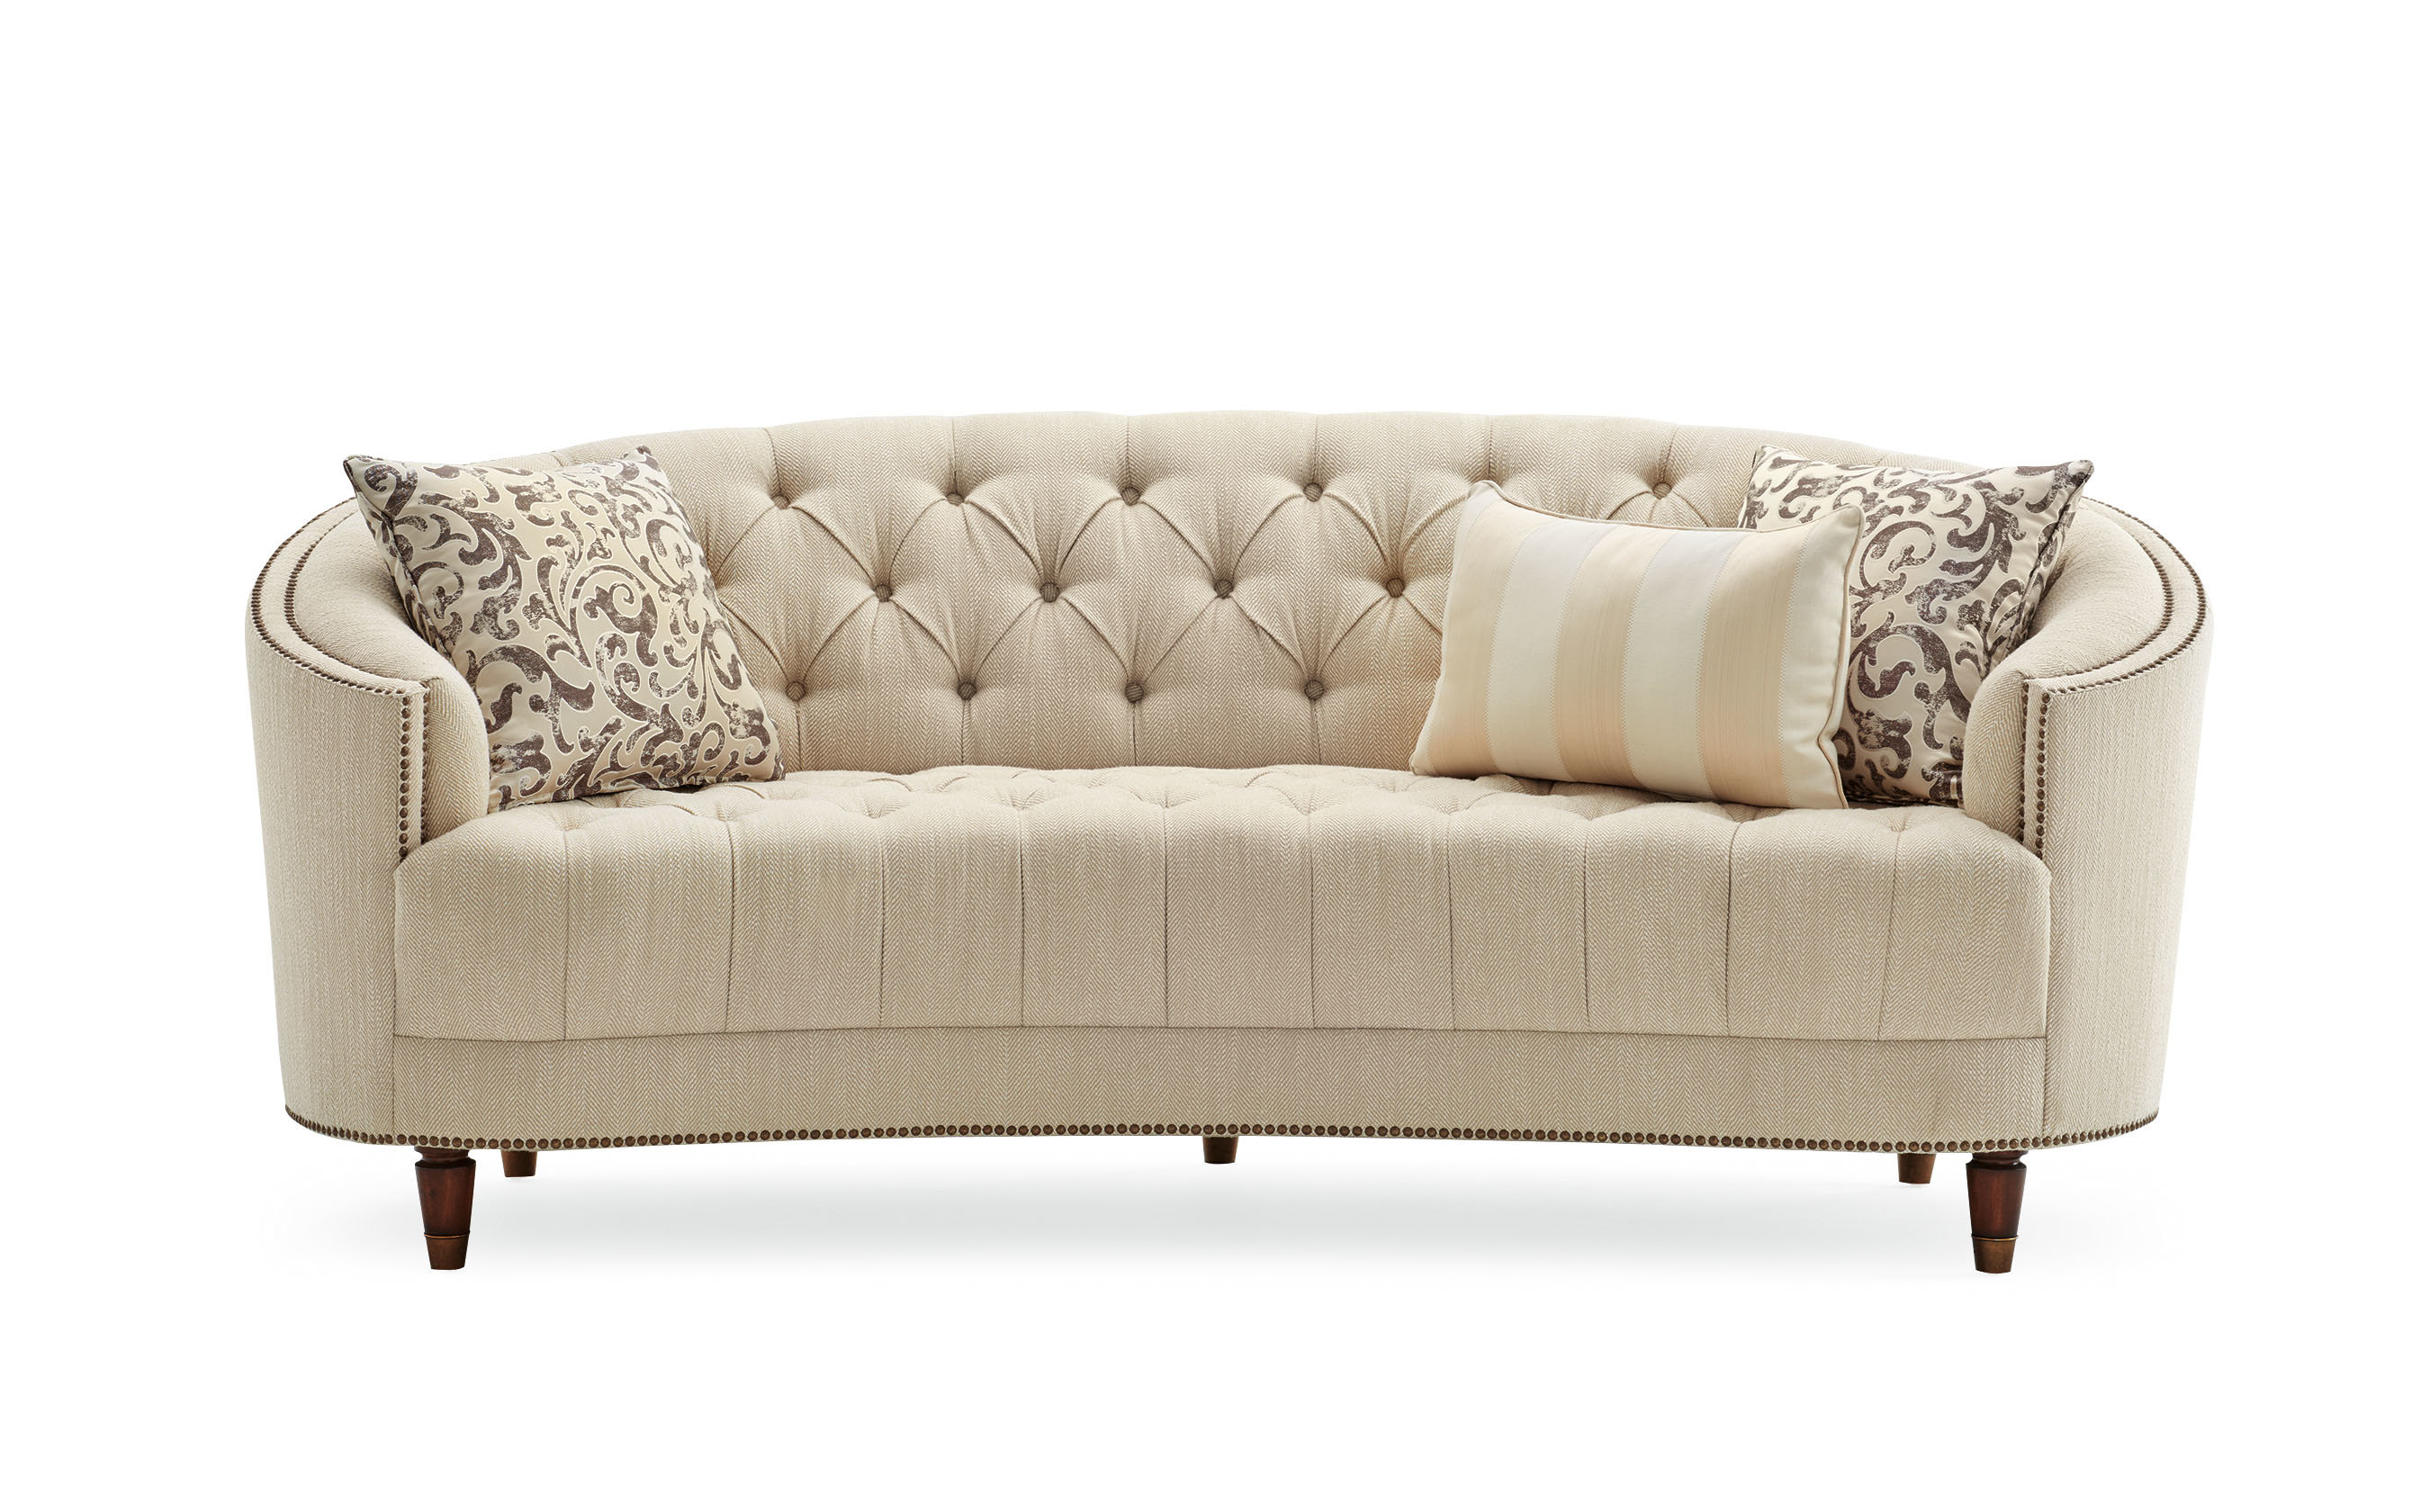 darby home co frederic tufted curved sofa & reviews |  Wayfair NWOFJJH